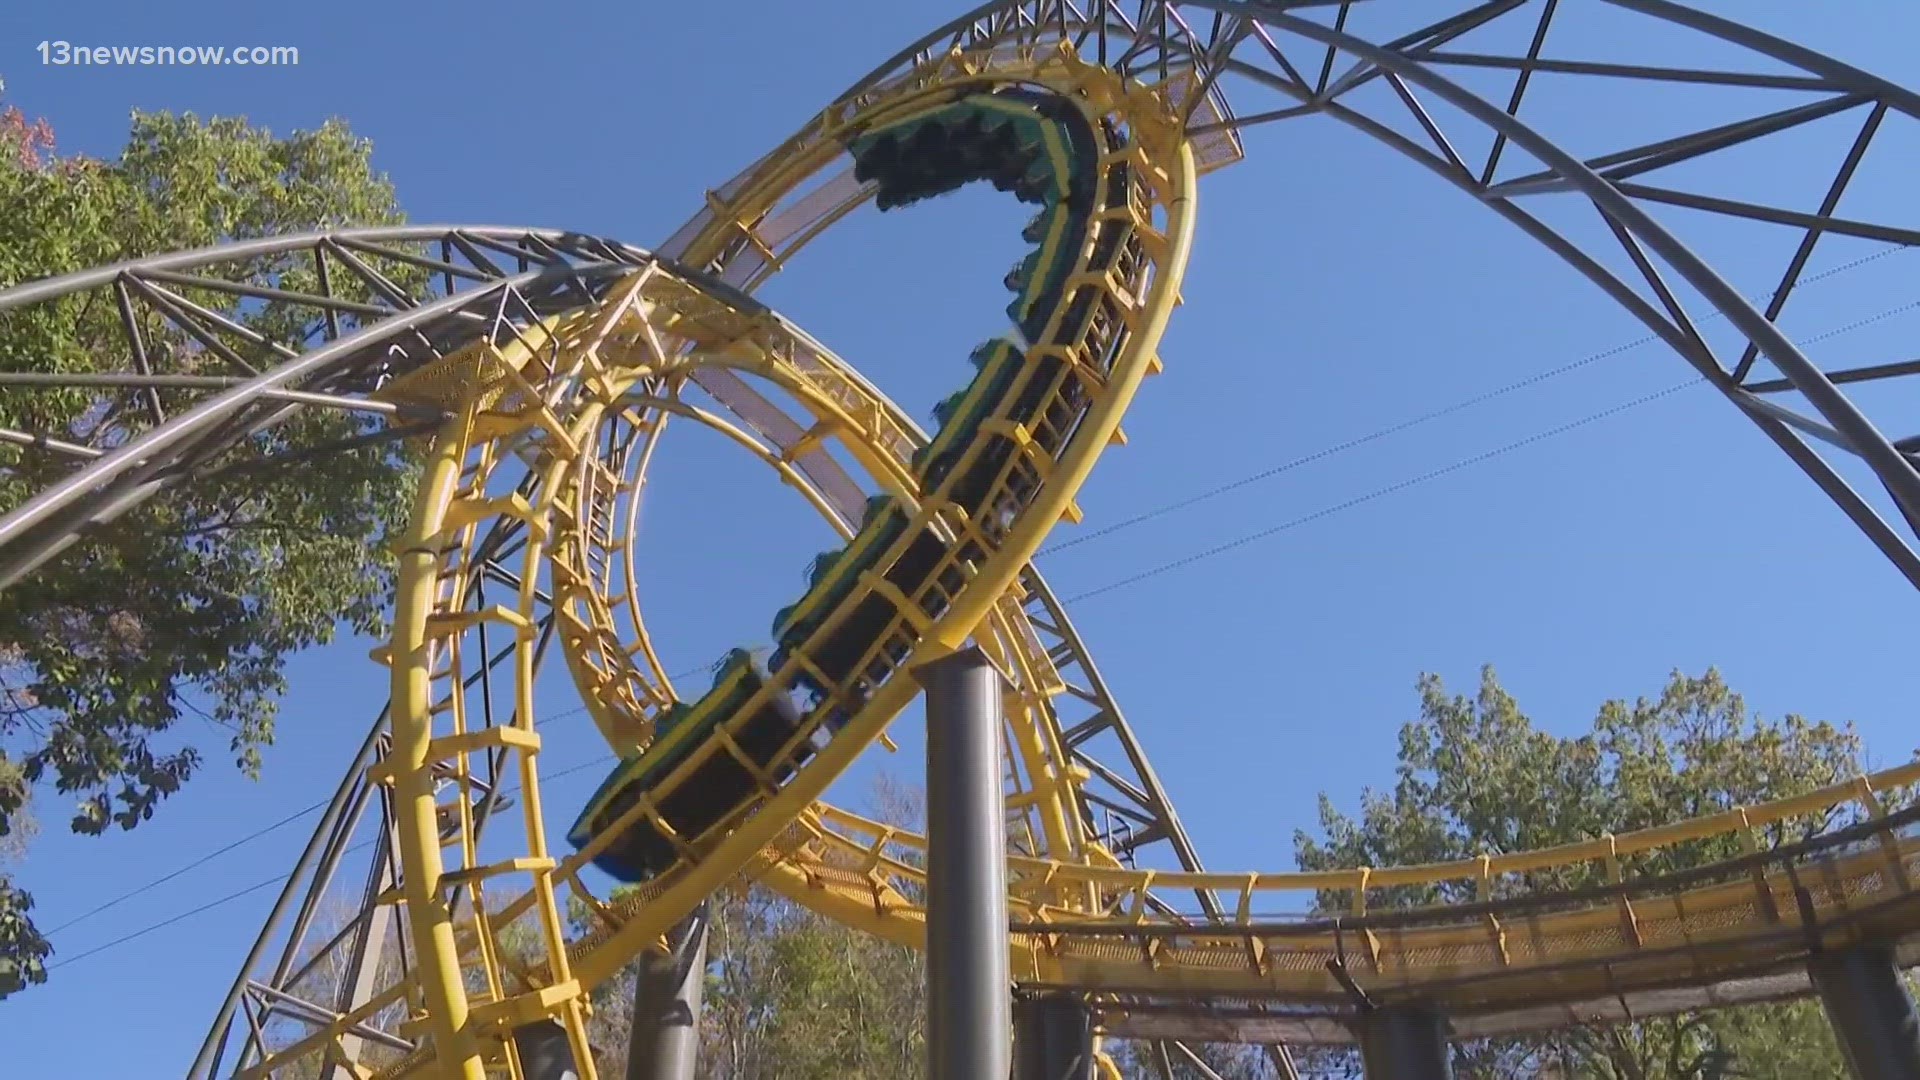 A fan-favorite at Busch Gardens Williamsburg will soon open back up to riders.